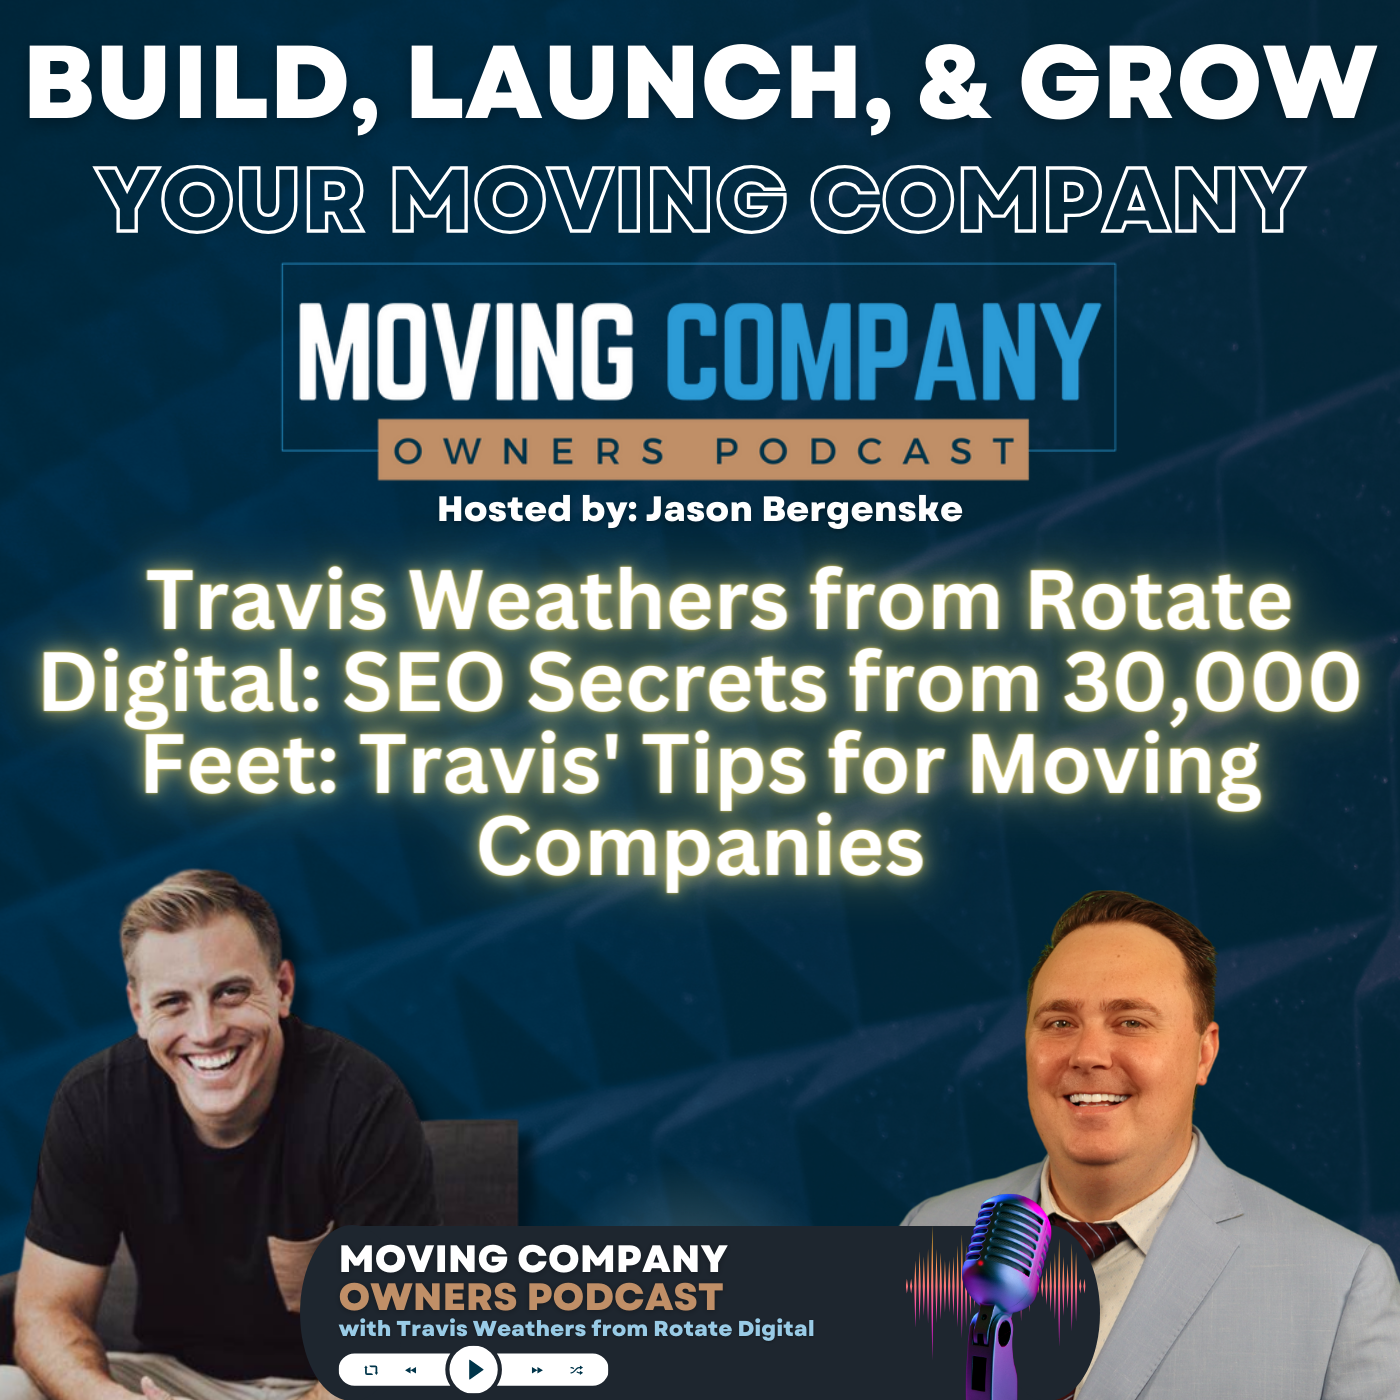 Travis Weathers from Rotate Digital: SEO Secrets from 30,000 Feet: Travis' Tips for Moving Companies